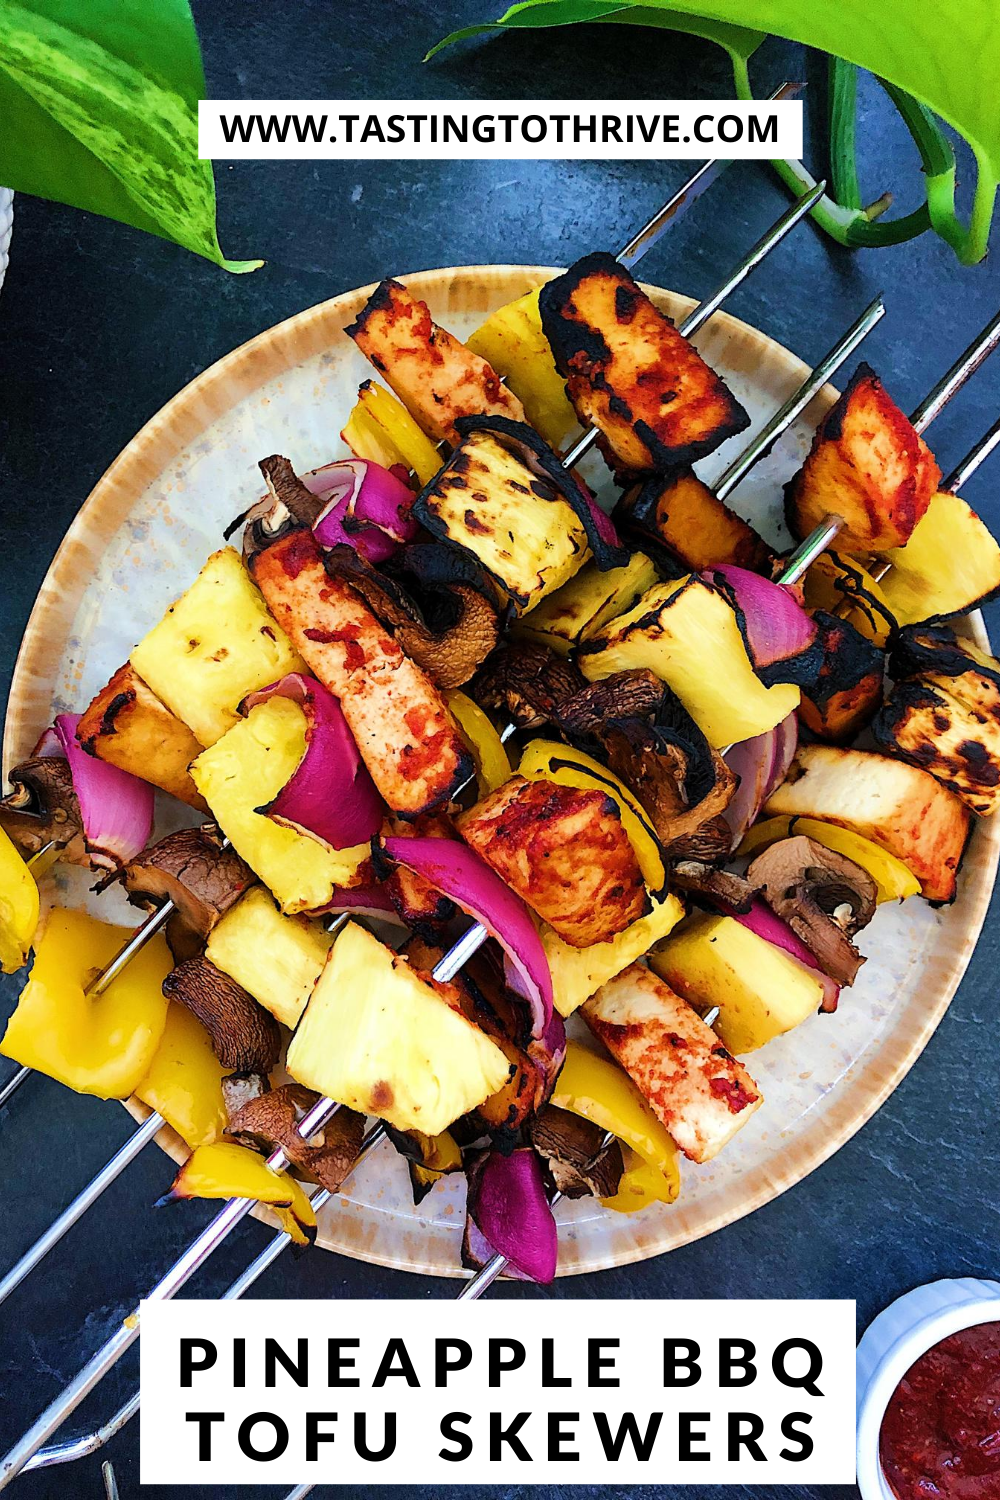 Pineapple BBQ Tofu Skewers recipe with a side of homemade BBQ sauce, vegan and gluten-free